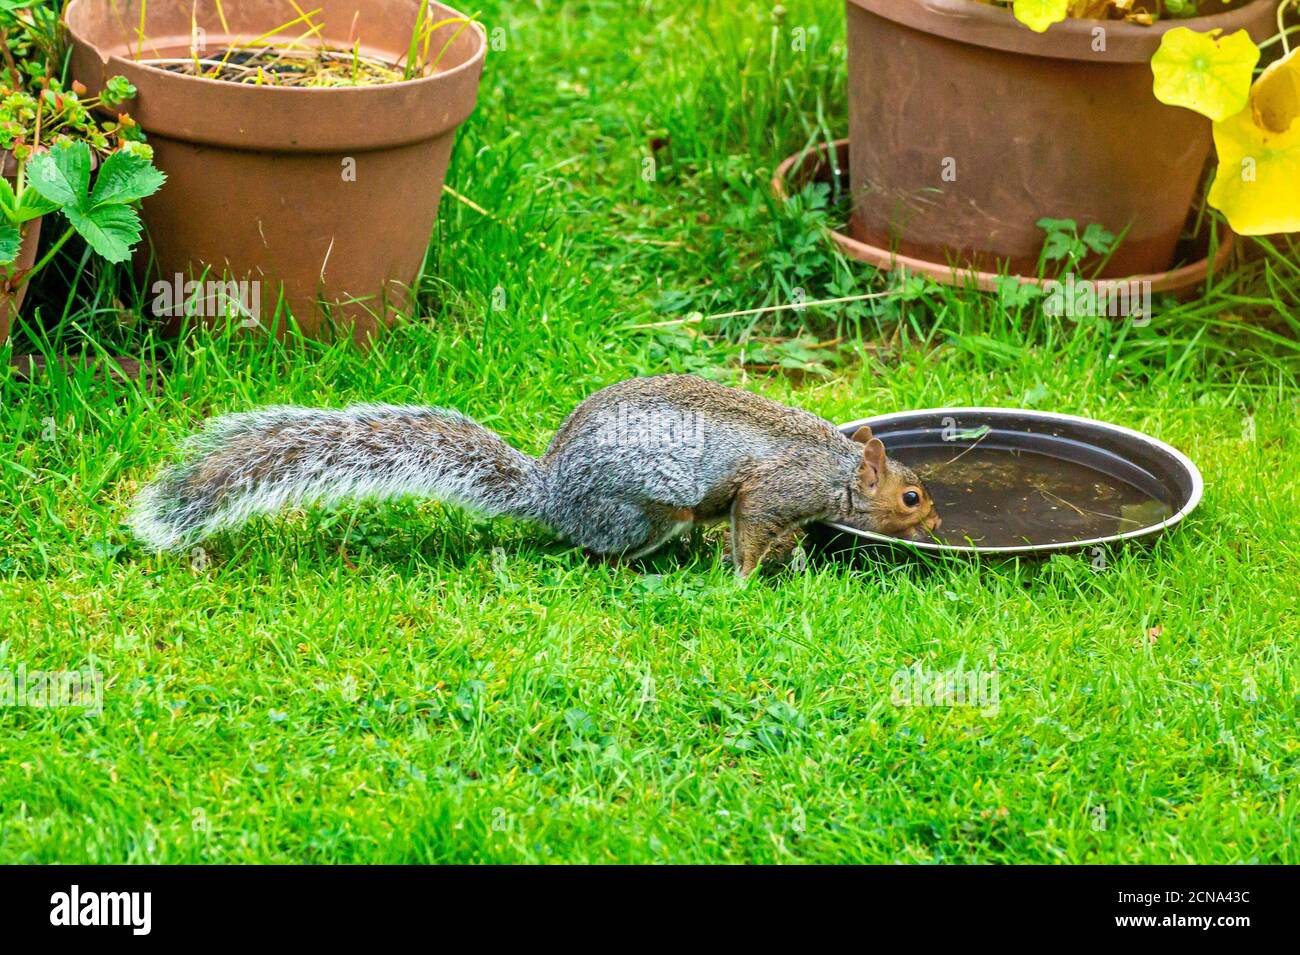 A thirsty grey squirrel drinking from old pan of water intended for birds in garden Stock Photo